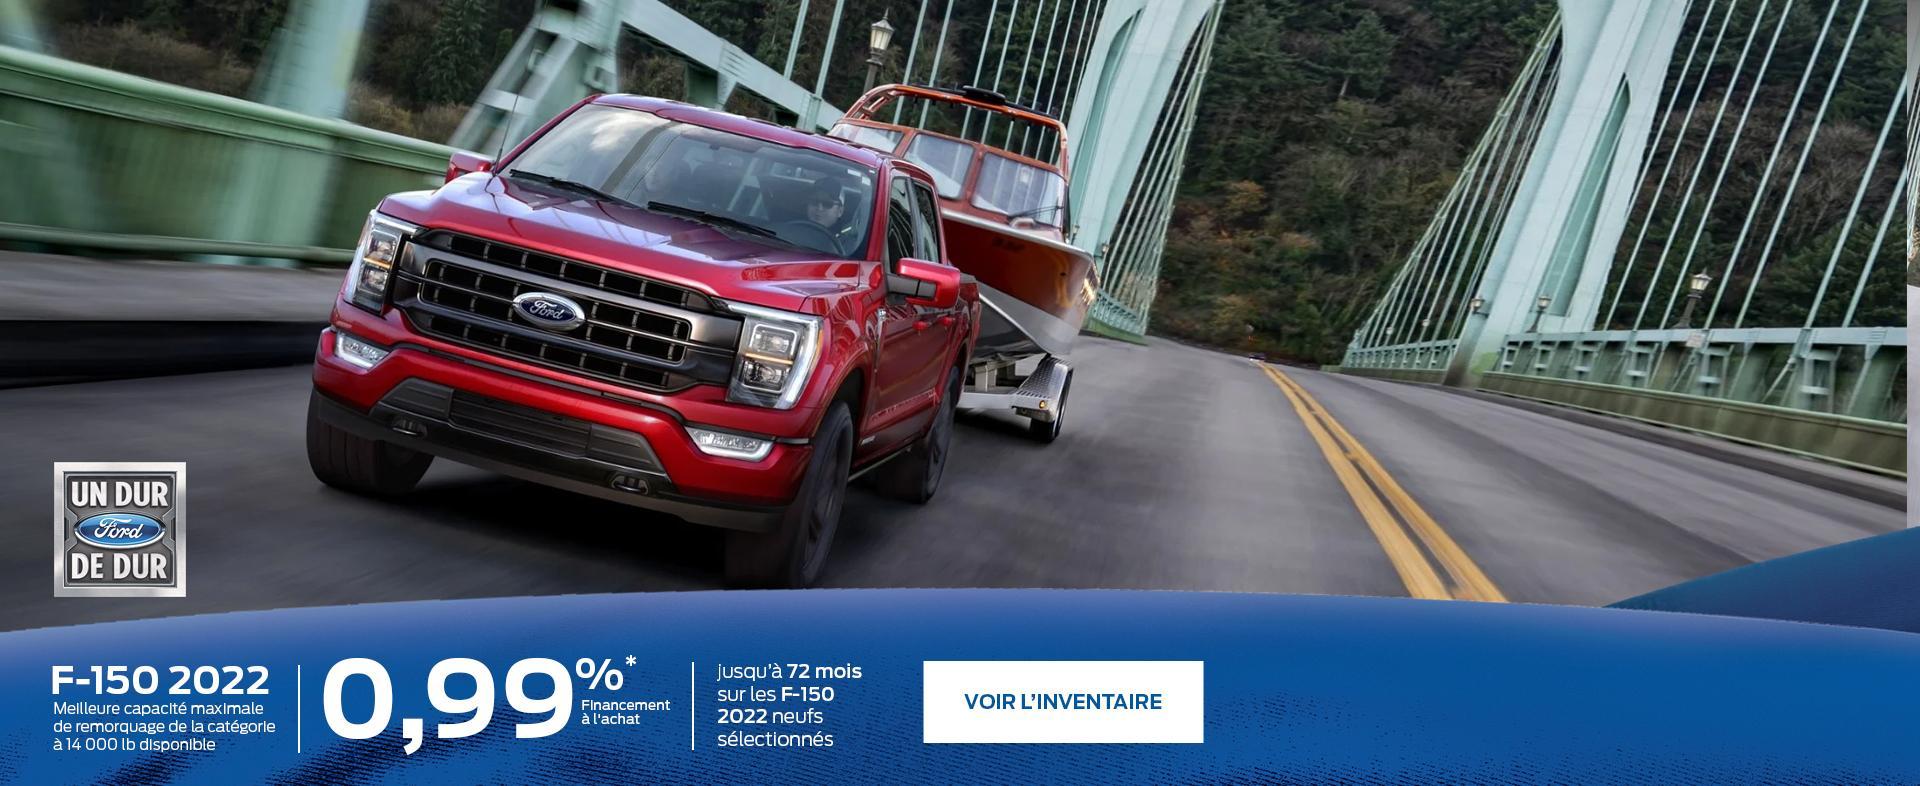 FORD F-150 | Ford of Canada